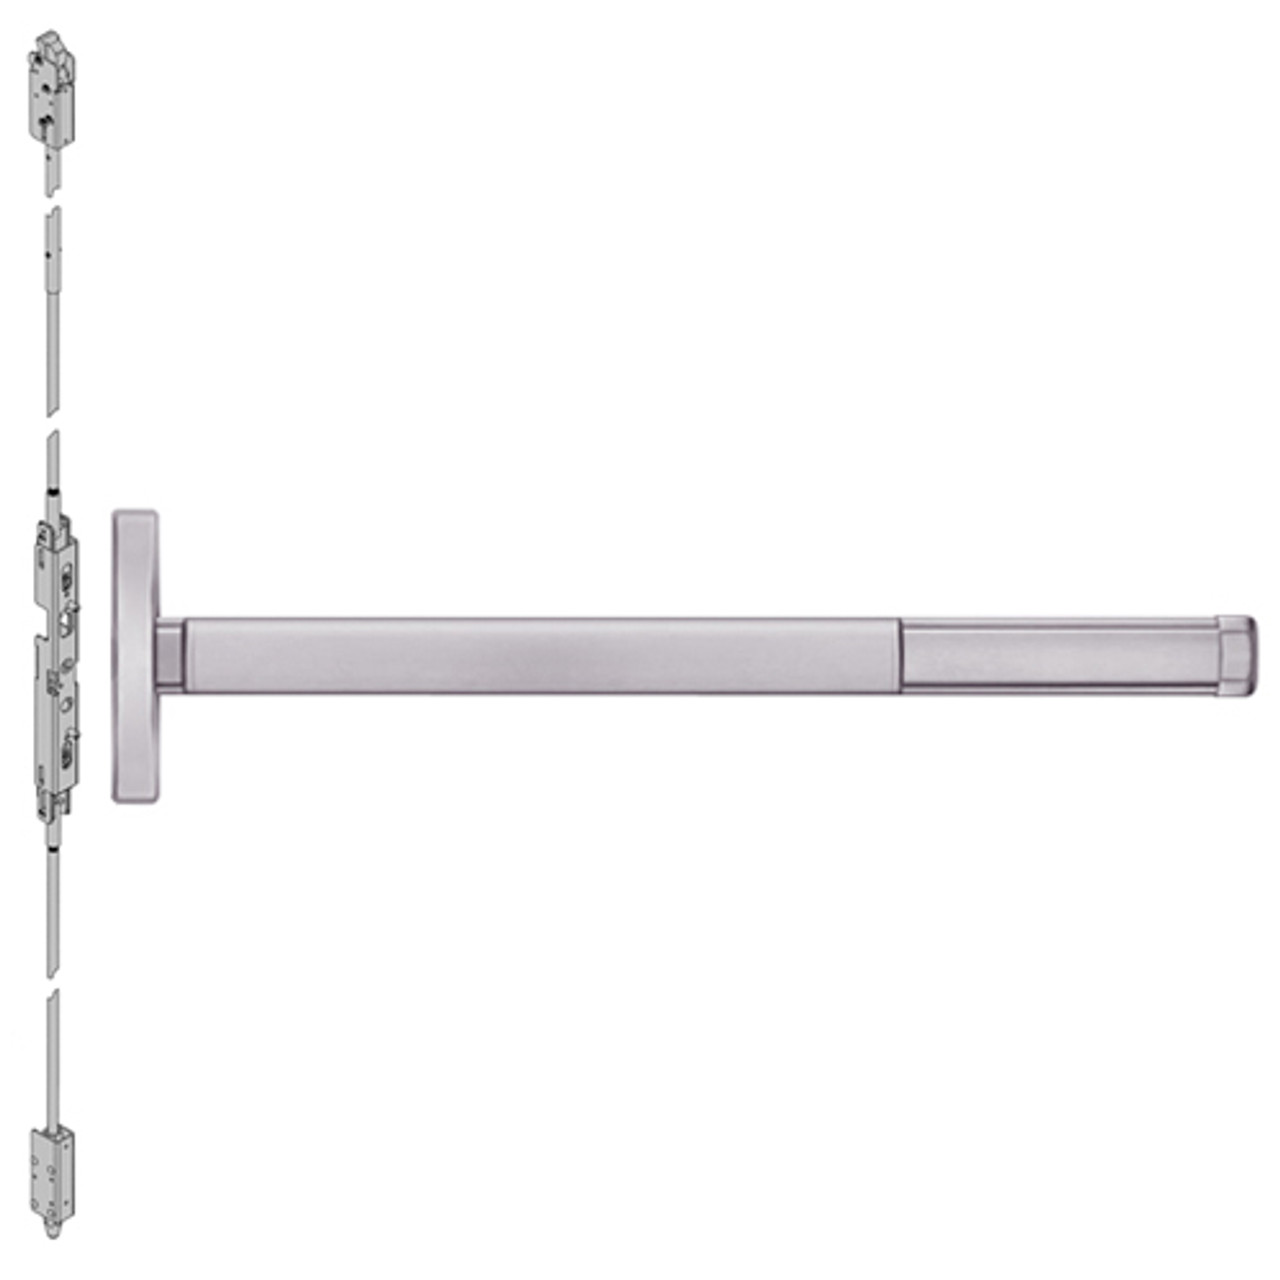 DEFL2608-630-36 PHI 2600 Series Fire Rated Concealed Vertical Rod Exit Device with Delayed Egress Prepped for Key Controls Lever in Satin Stainless Steel Finish